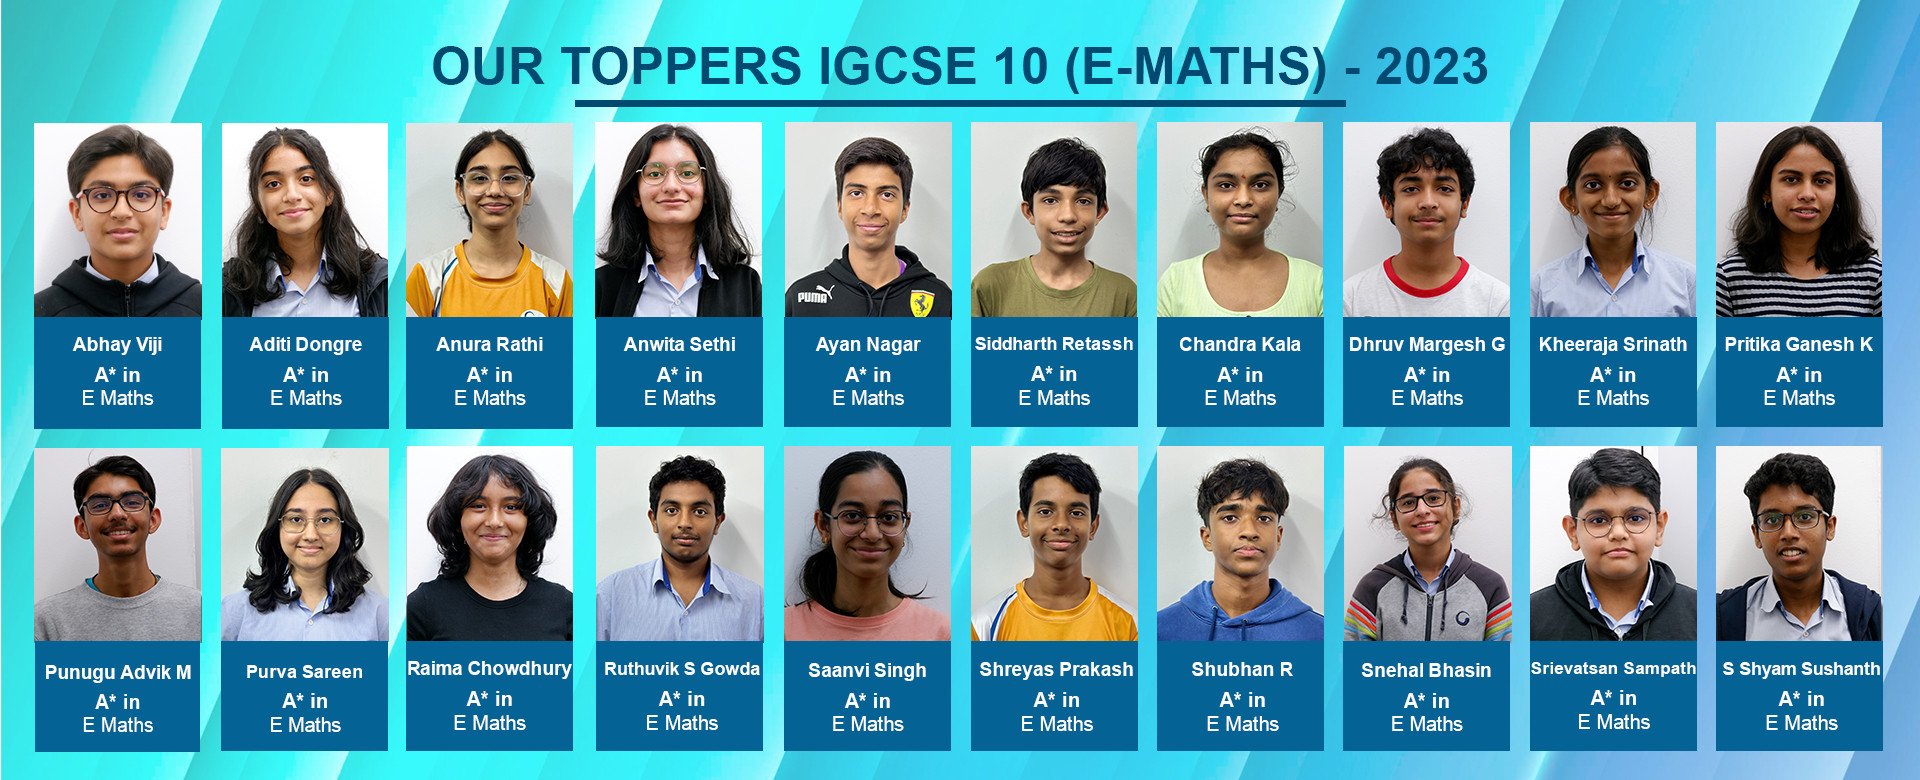 Our IGCSE 10 Extended Maths Toppers - 2023